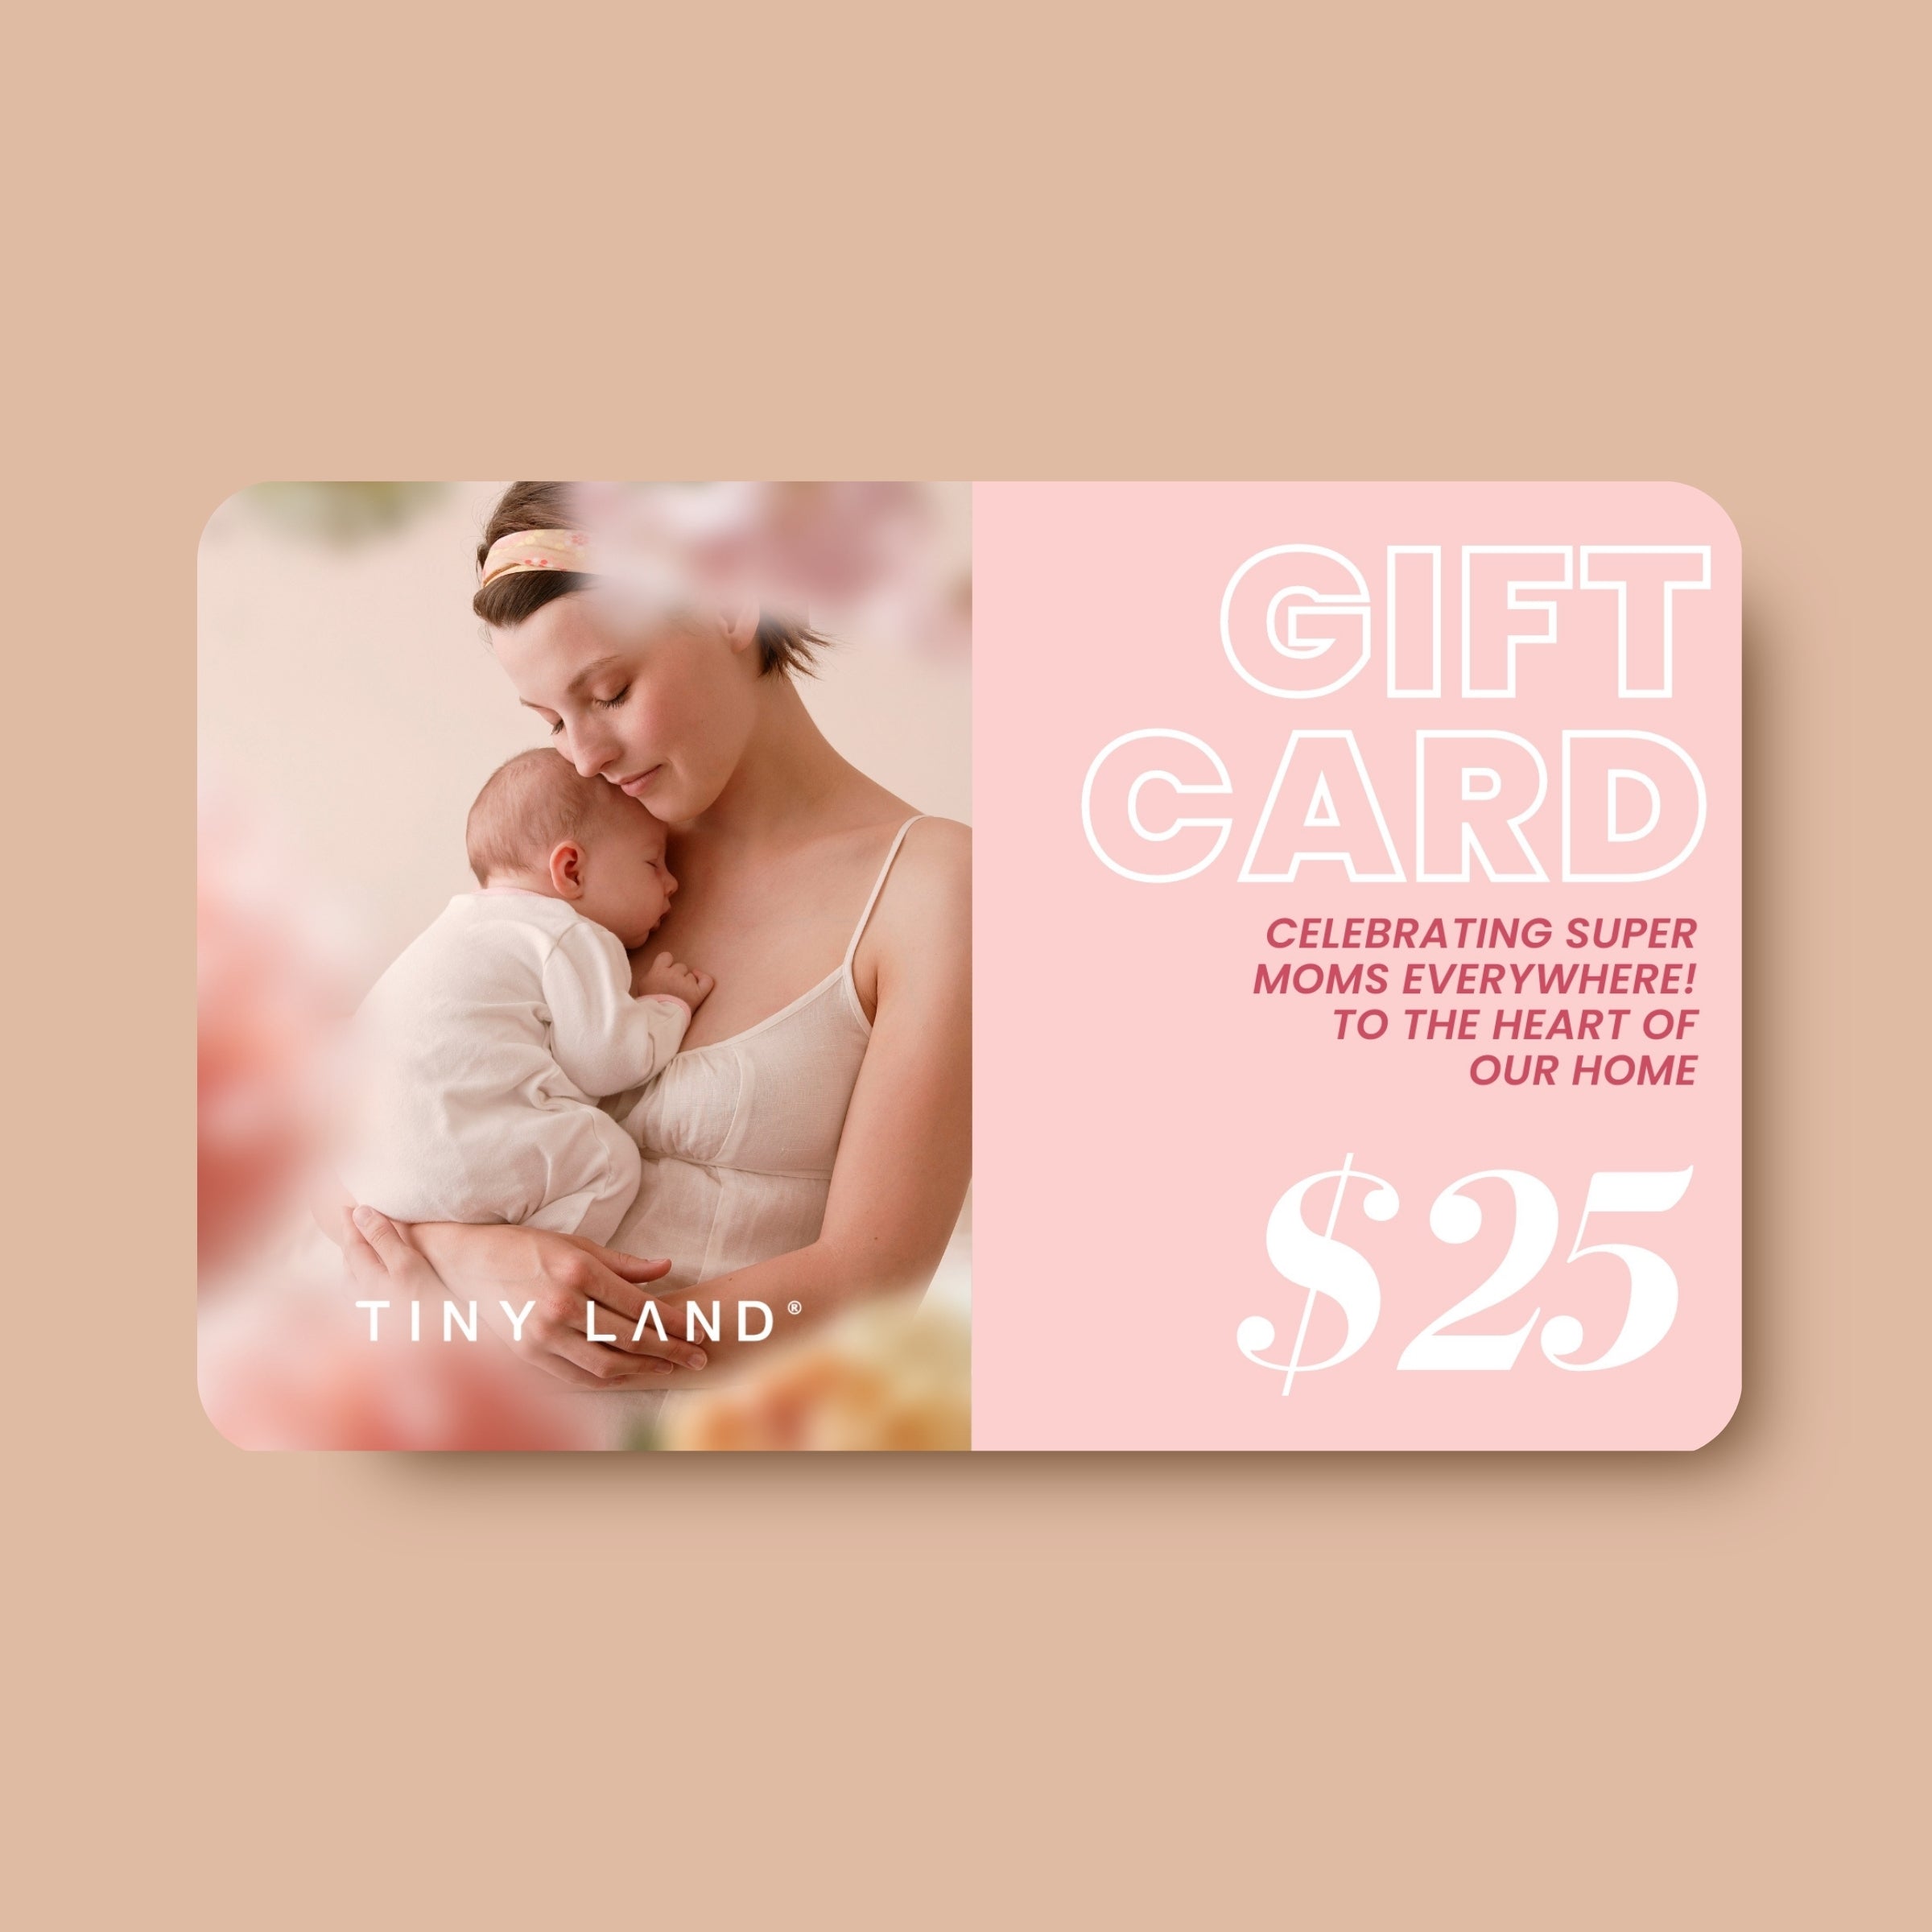 Mother's Day Gidtcard $25